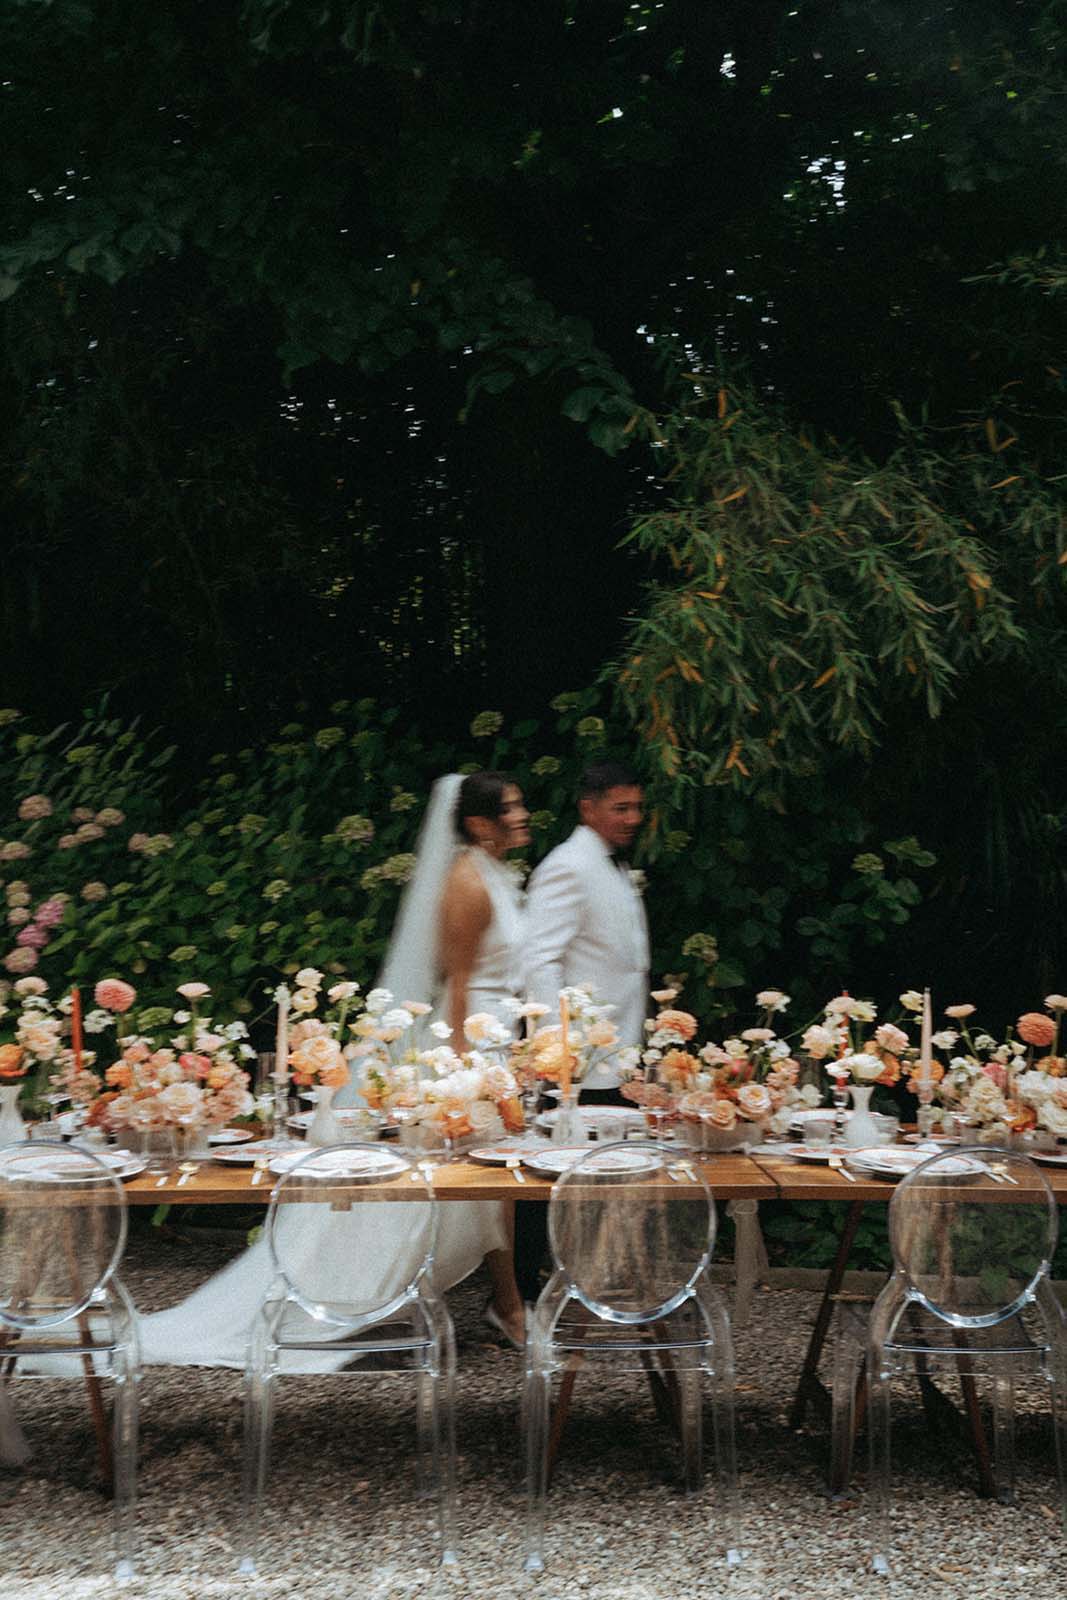 Enchanting Bride and Groom Amidst a Beautiful Wedding Table Setting